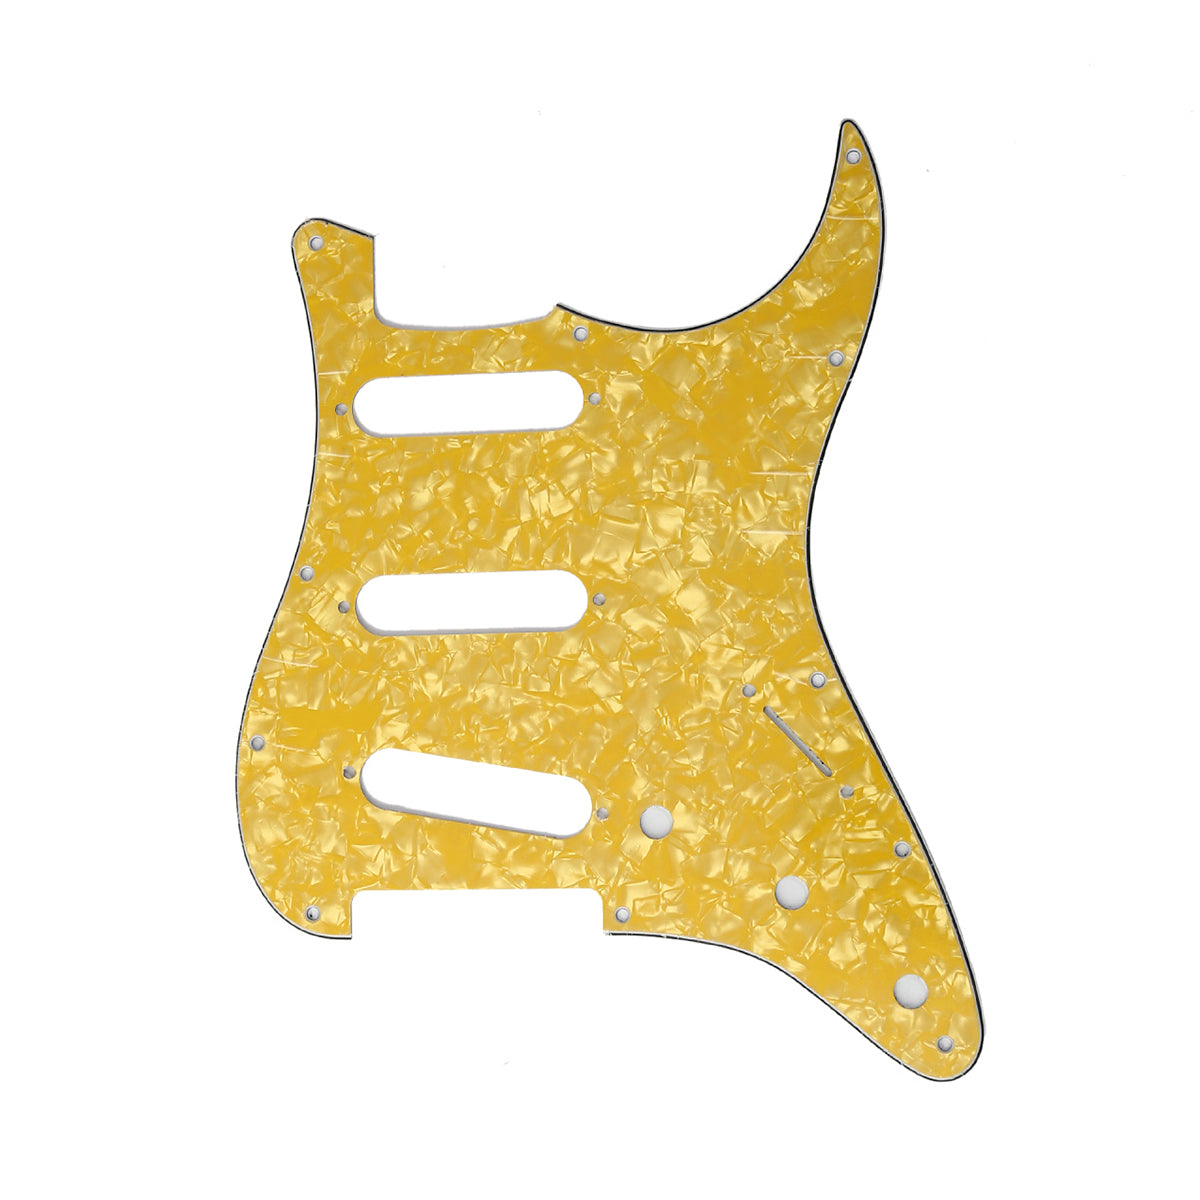 Musiclily SSS 11 Hole Strat Guitar Pickguard for Fender USA/Mexican Made Standard Stratocaster Modern Style, 4Ply Yellow Pearl